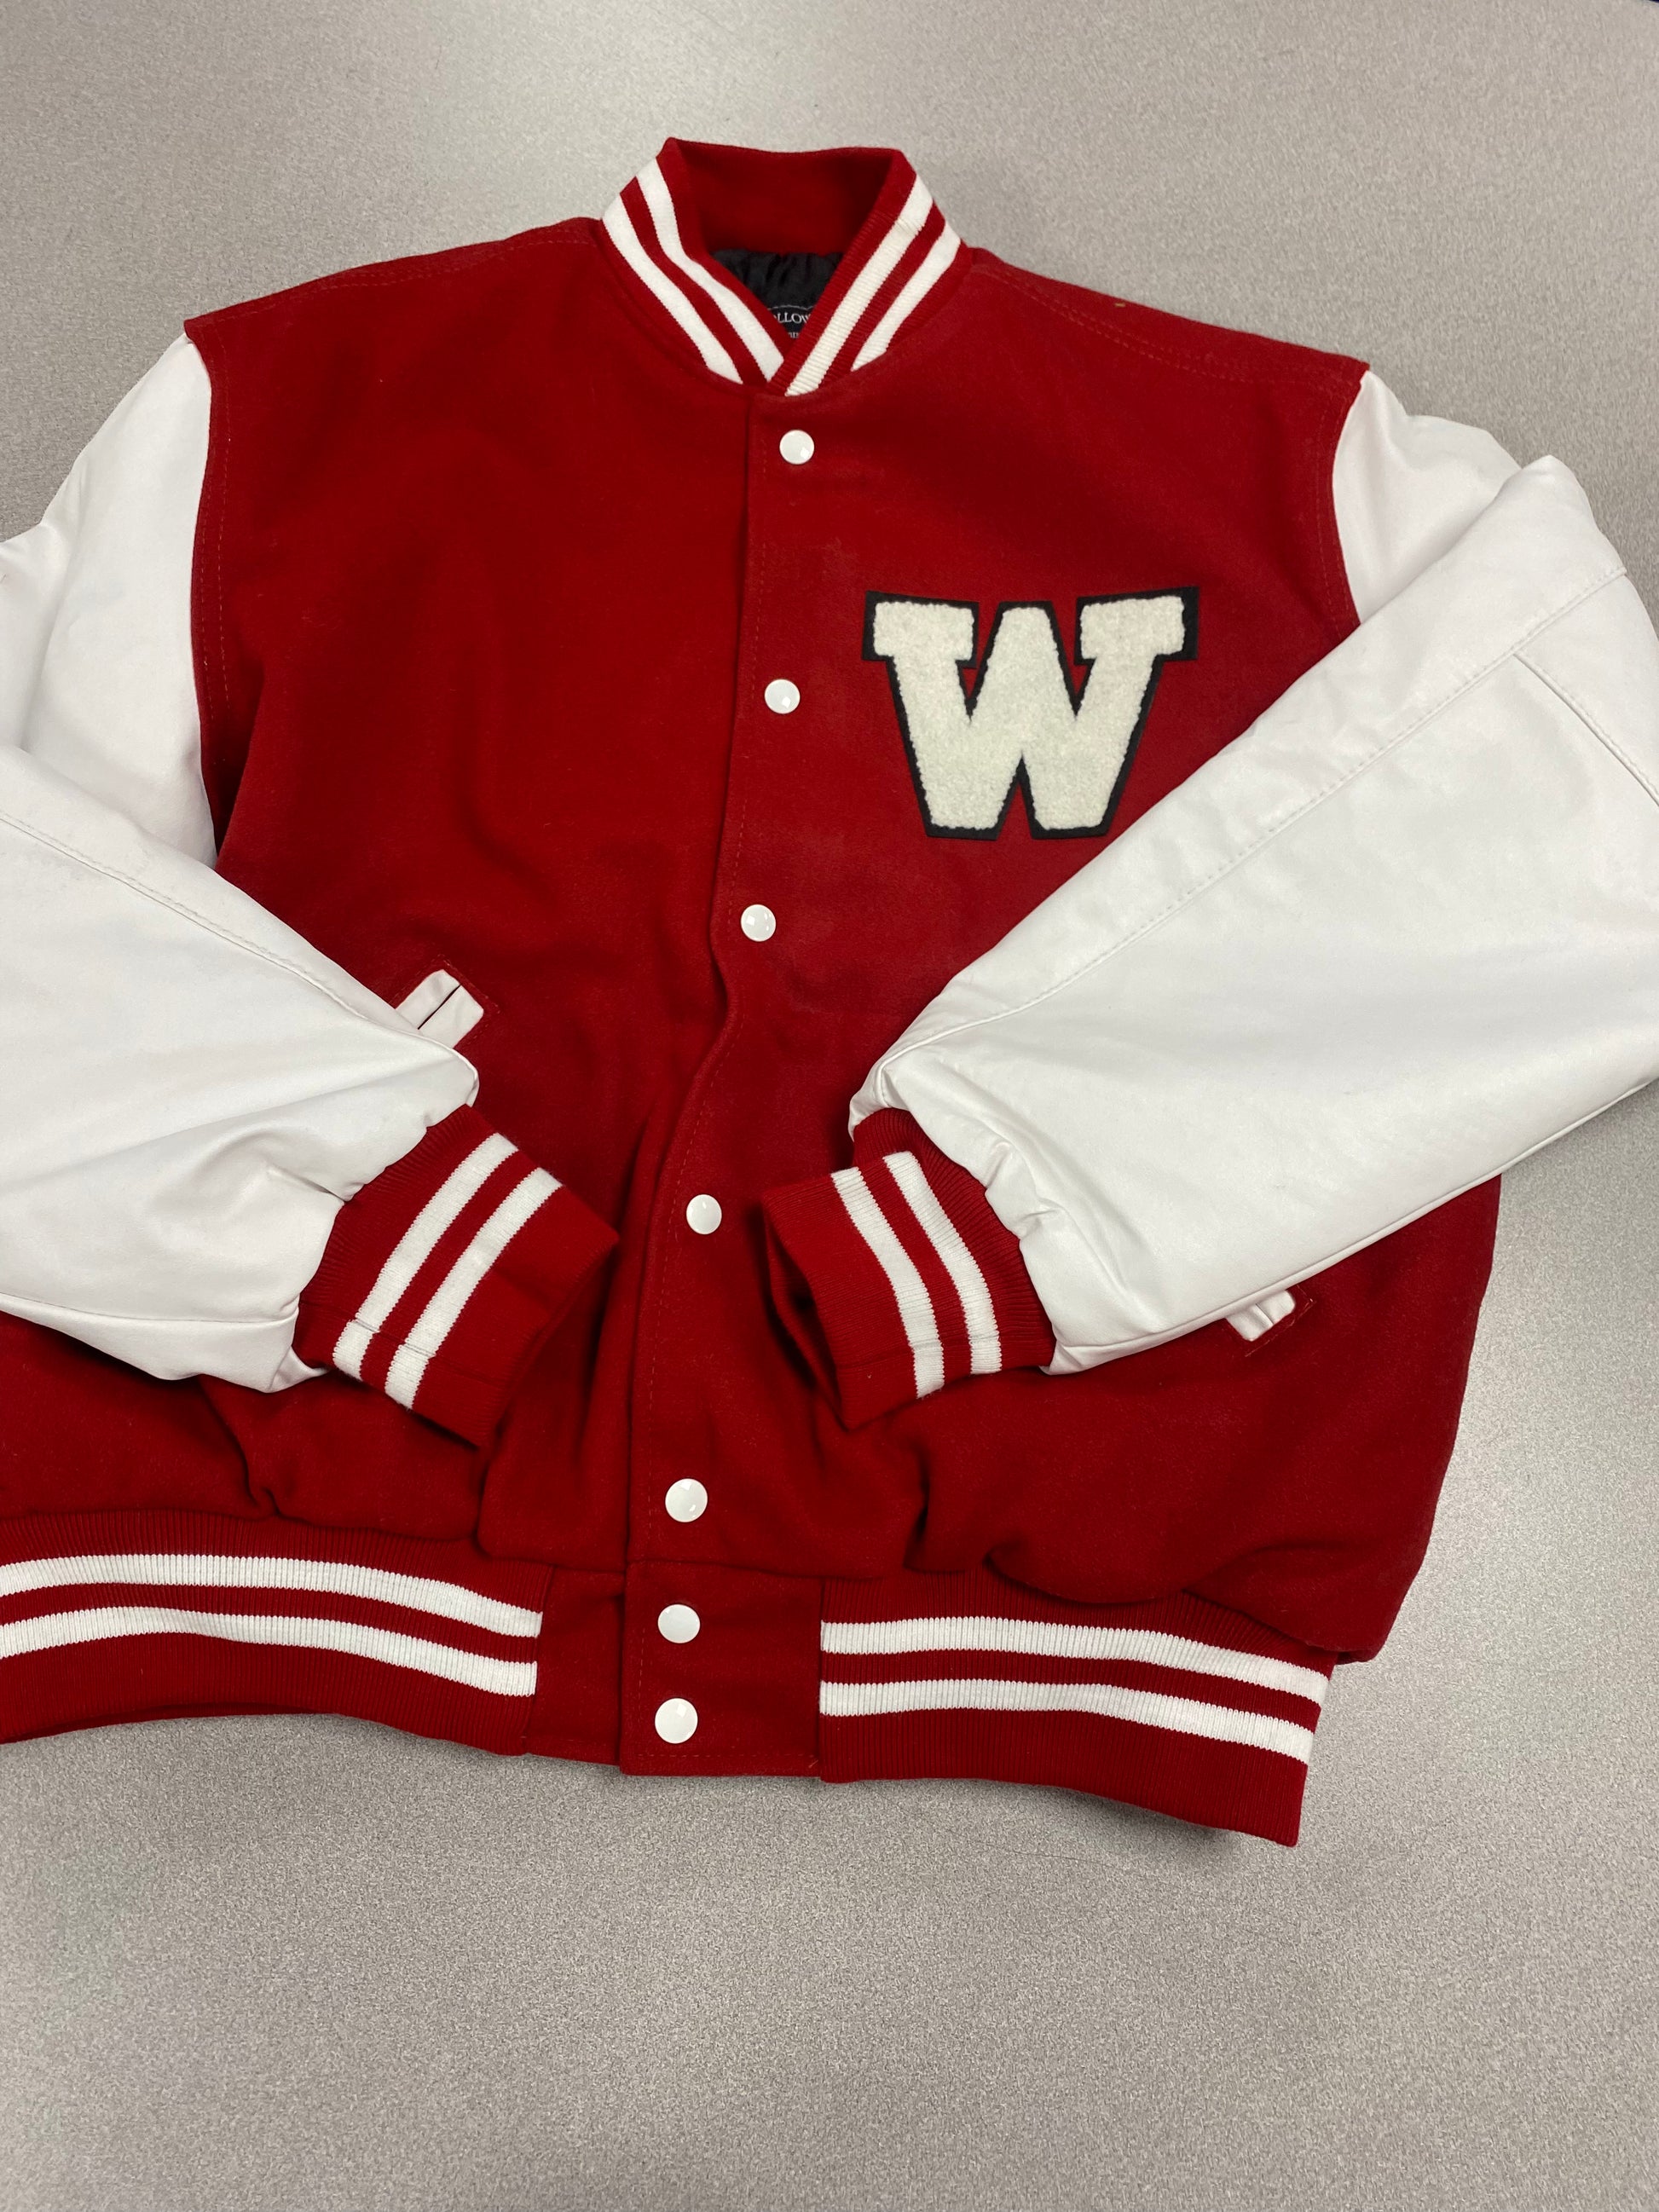 Letterman Jackets for sale in Tampico, Indiana